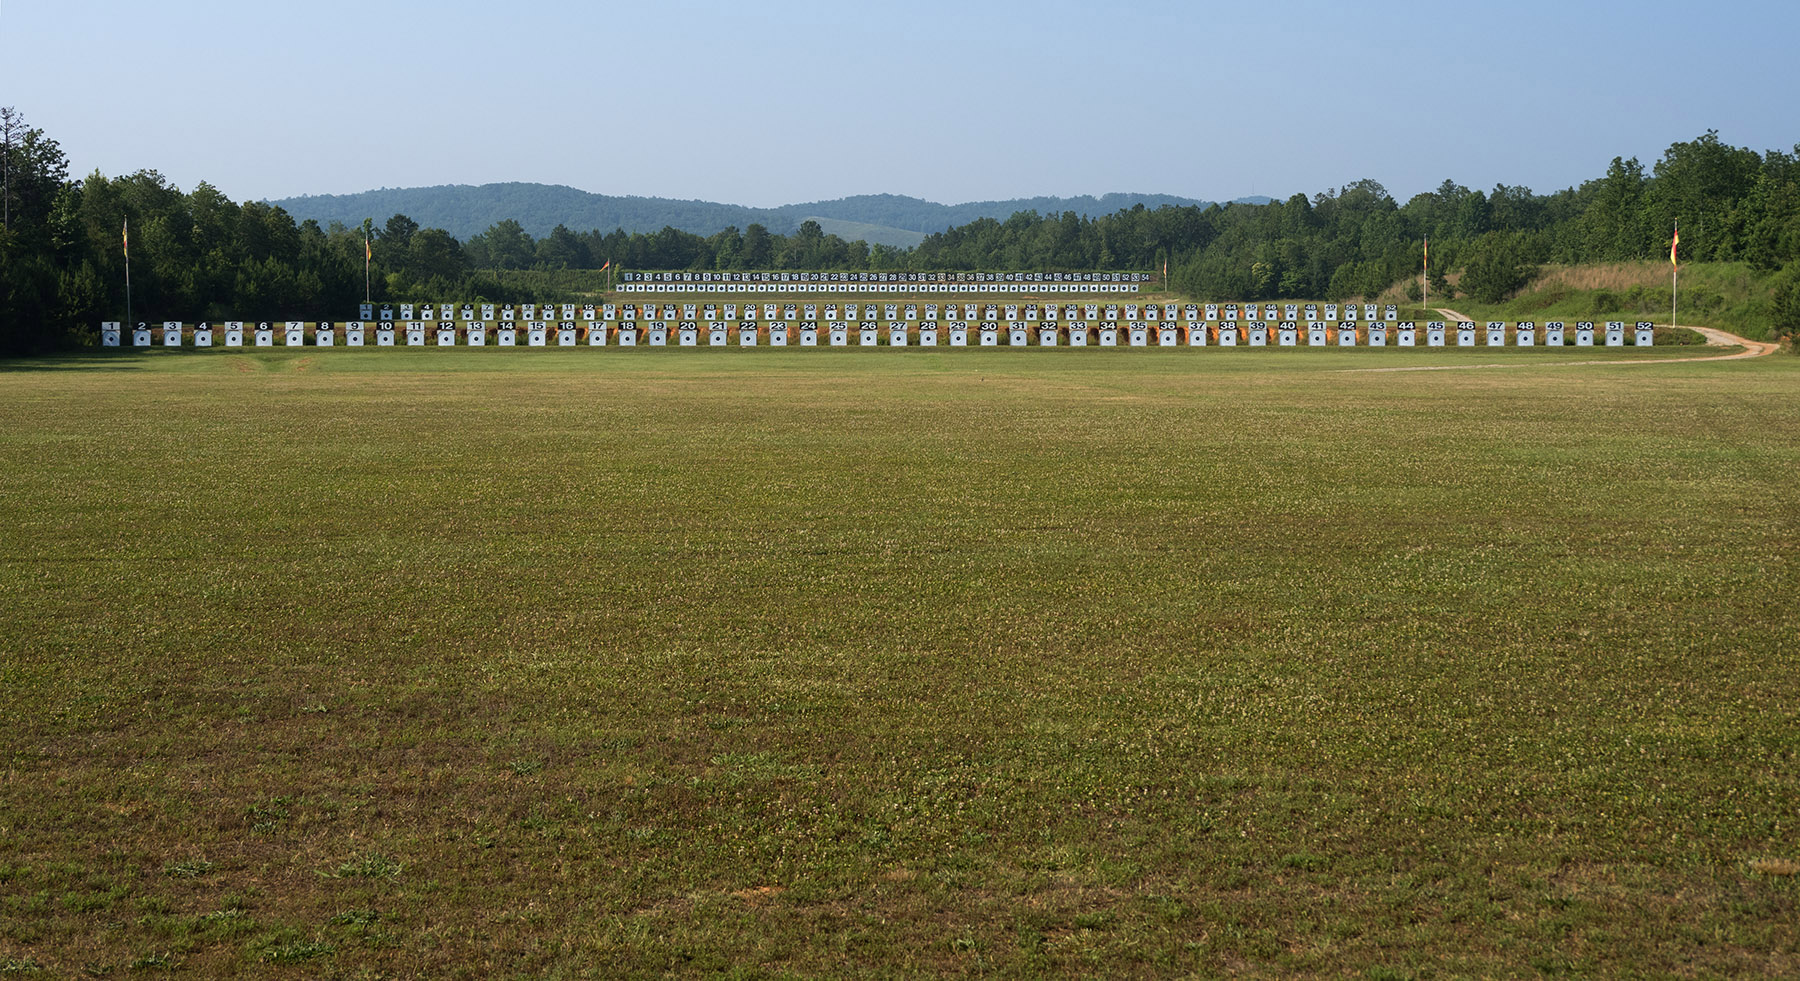 600 yard range at CMP Talladega Marksmanship Park.  Electronic targets at 200, 300 and 600 yards from 52 positions on the firing line.  Competitors in the Garand, Springfield and Vintage Sniper matches shot on this range.